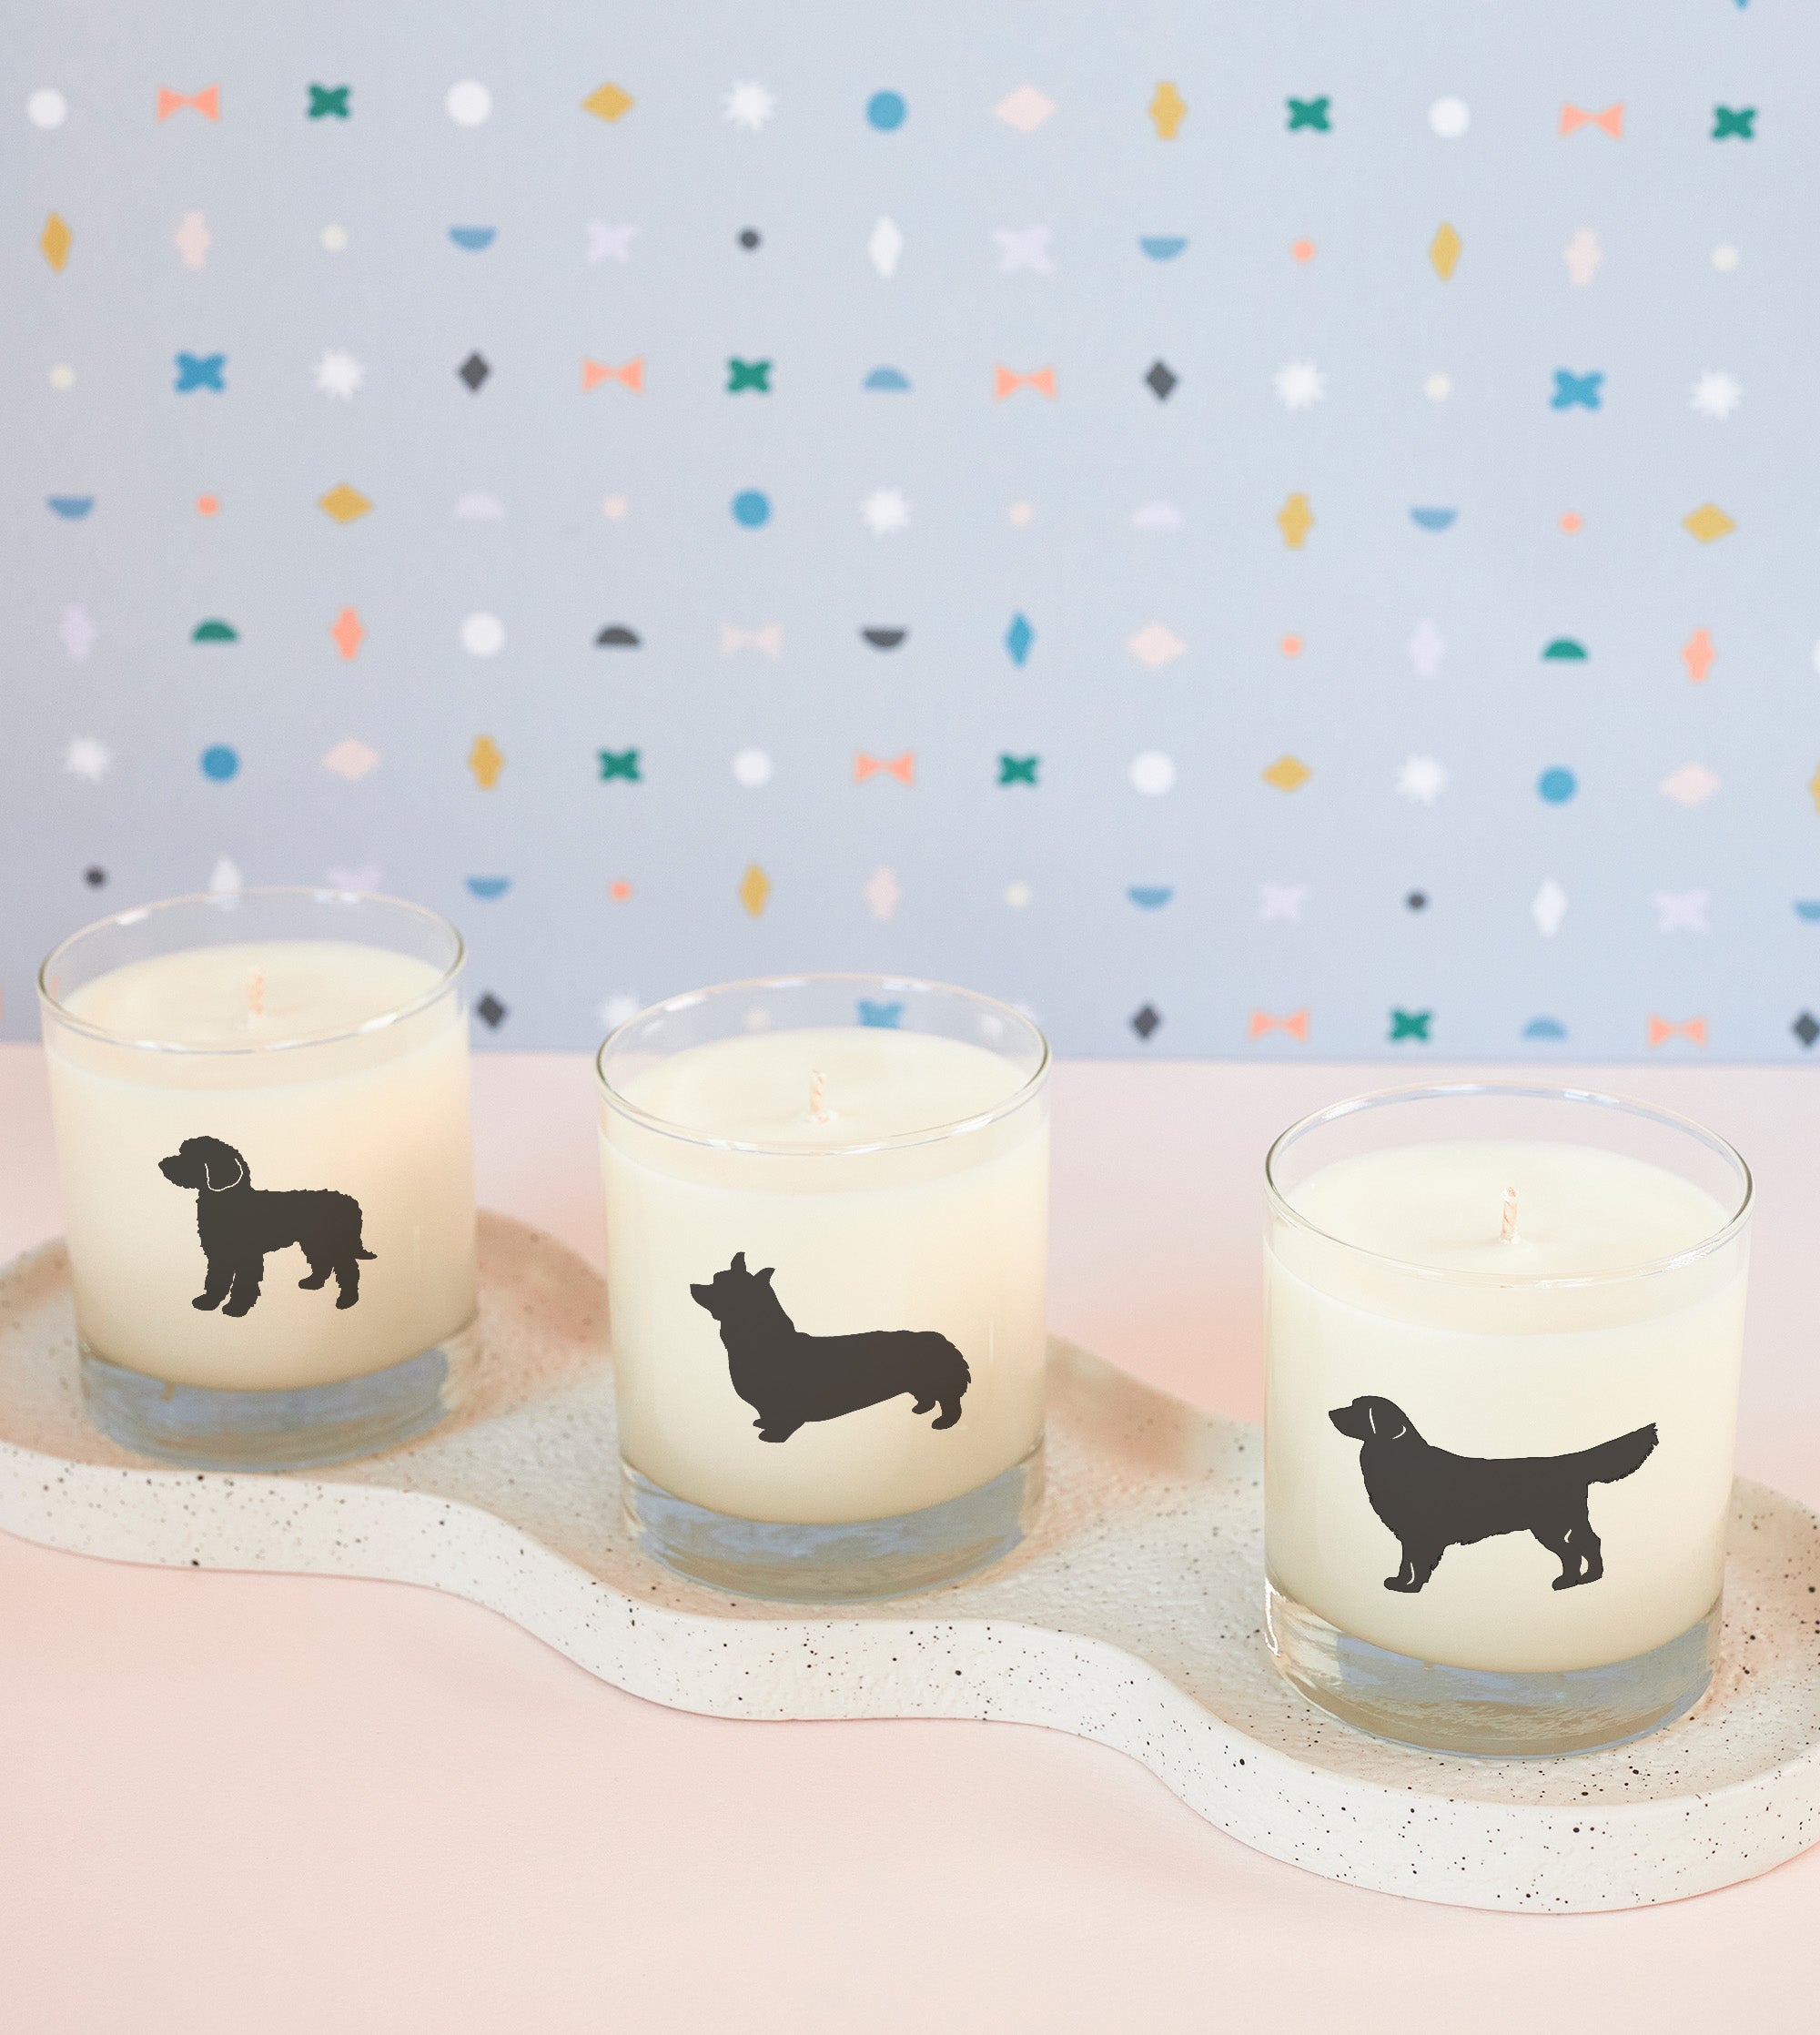 Labradoodle Dog Breed Soy Candle